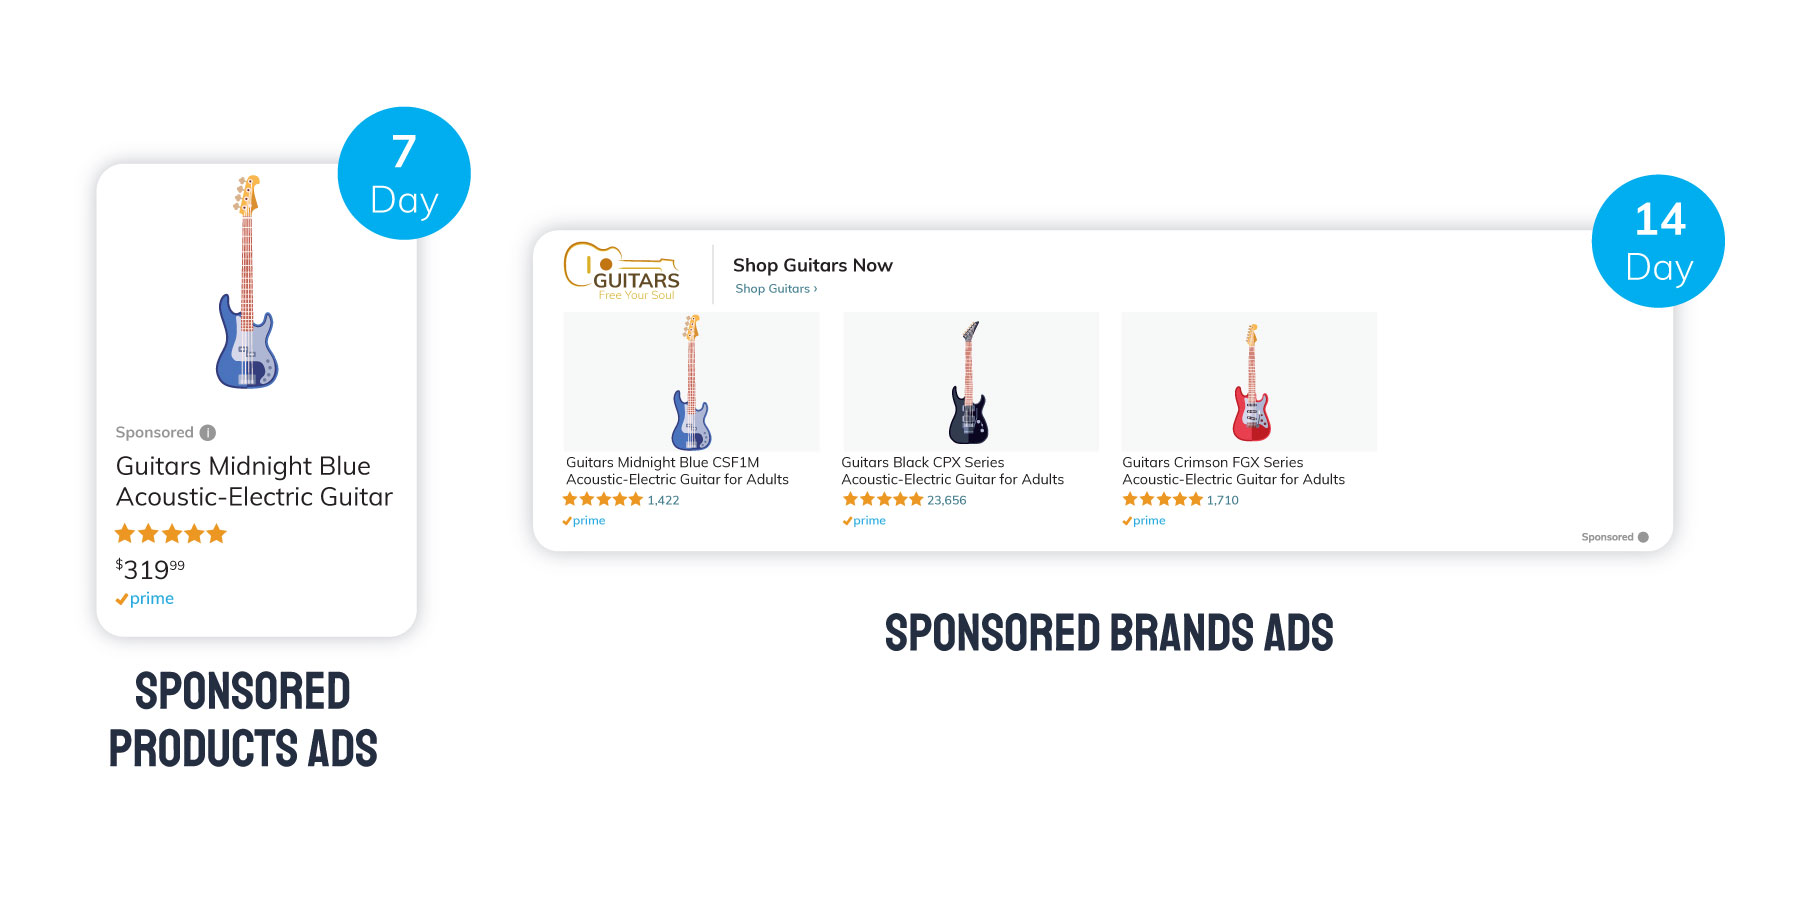 sponsored products ads and sponsored brands ads